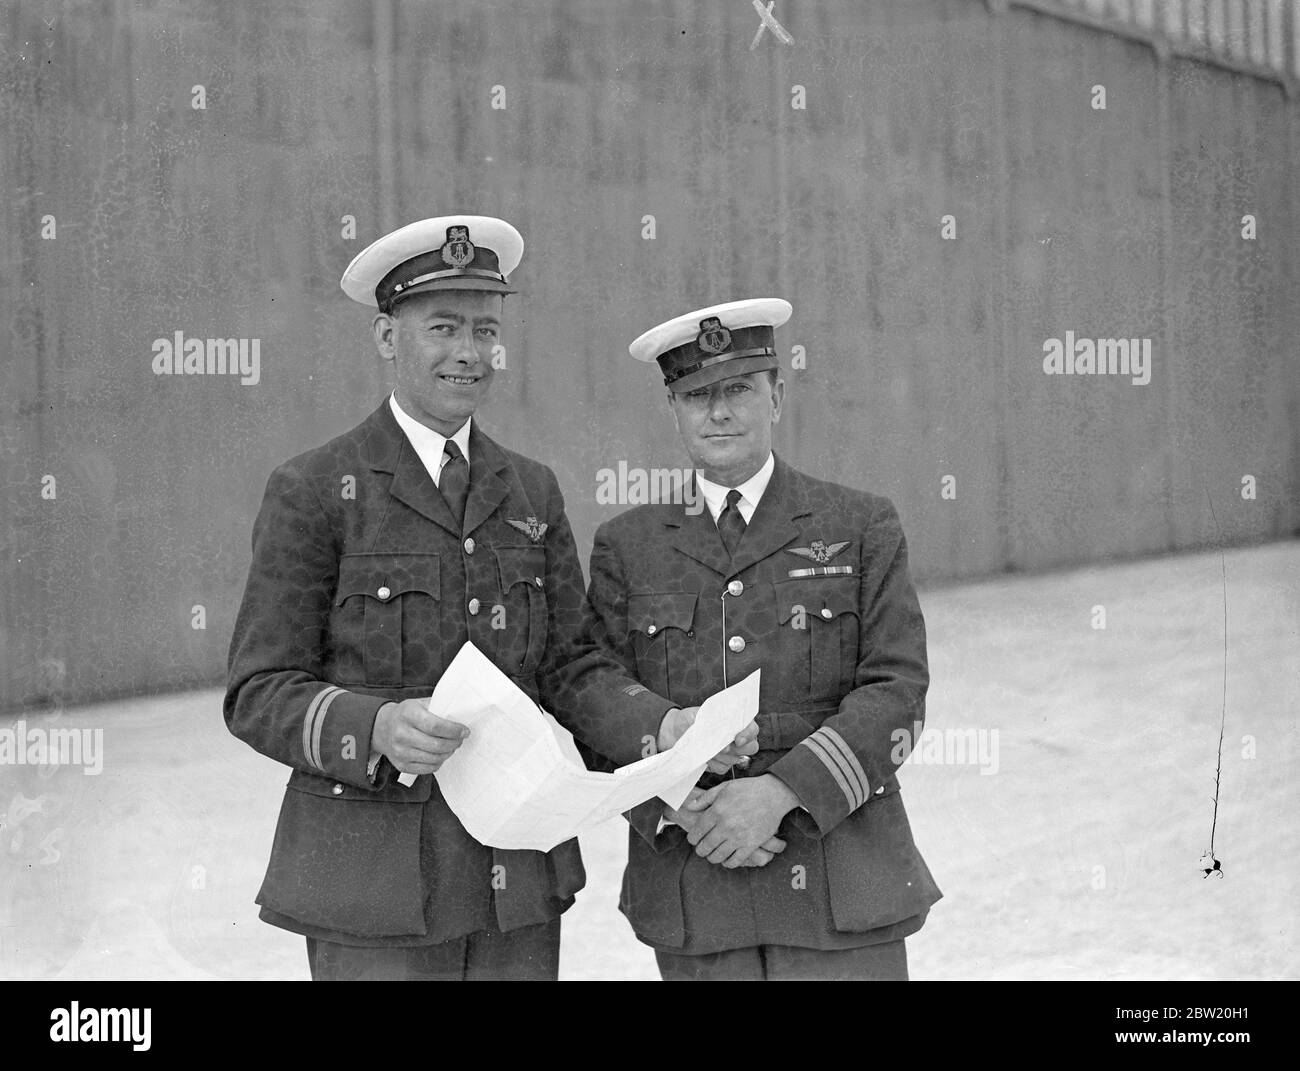 Captain A. S. Wilcockson (right) and First Officer G. H. Bowes studying the Atlantic route at Hythe, Southampton in readiness for the first experimental commercial transatlantic crossing to be made by the flying boat Caledonia next week (June 24). 18 June 1937 Stock Photo